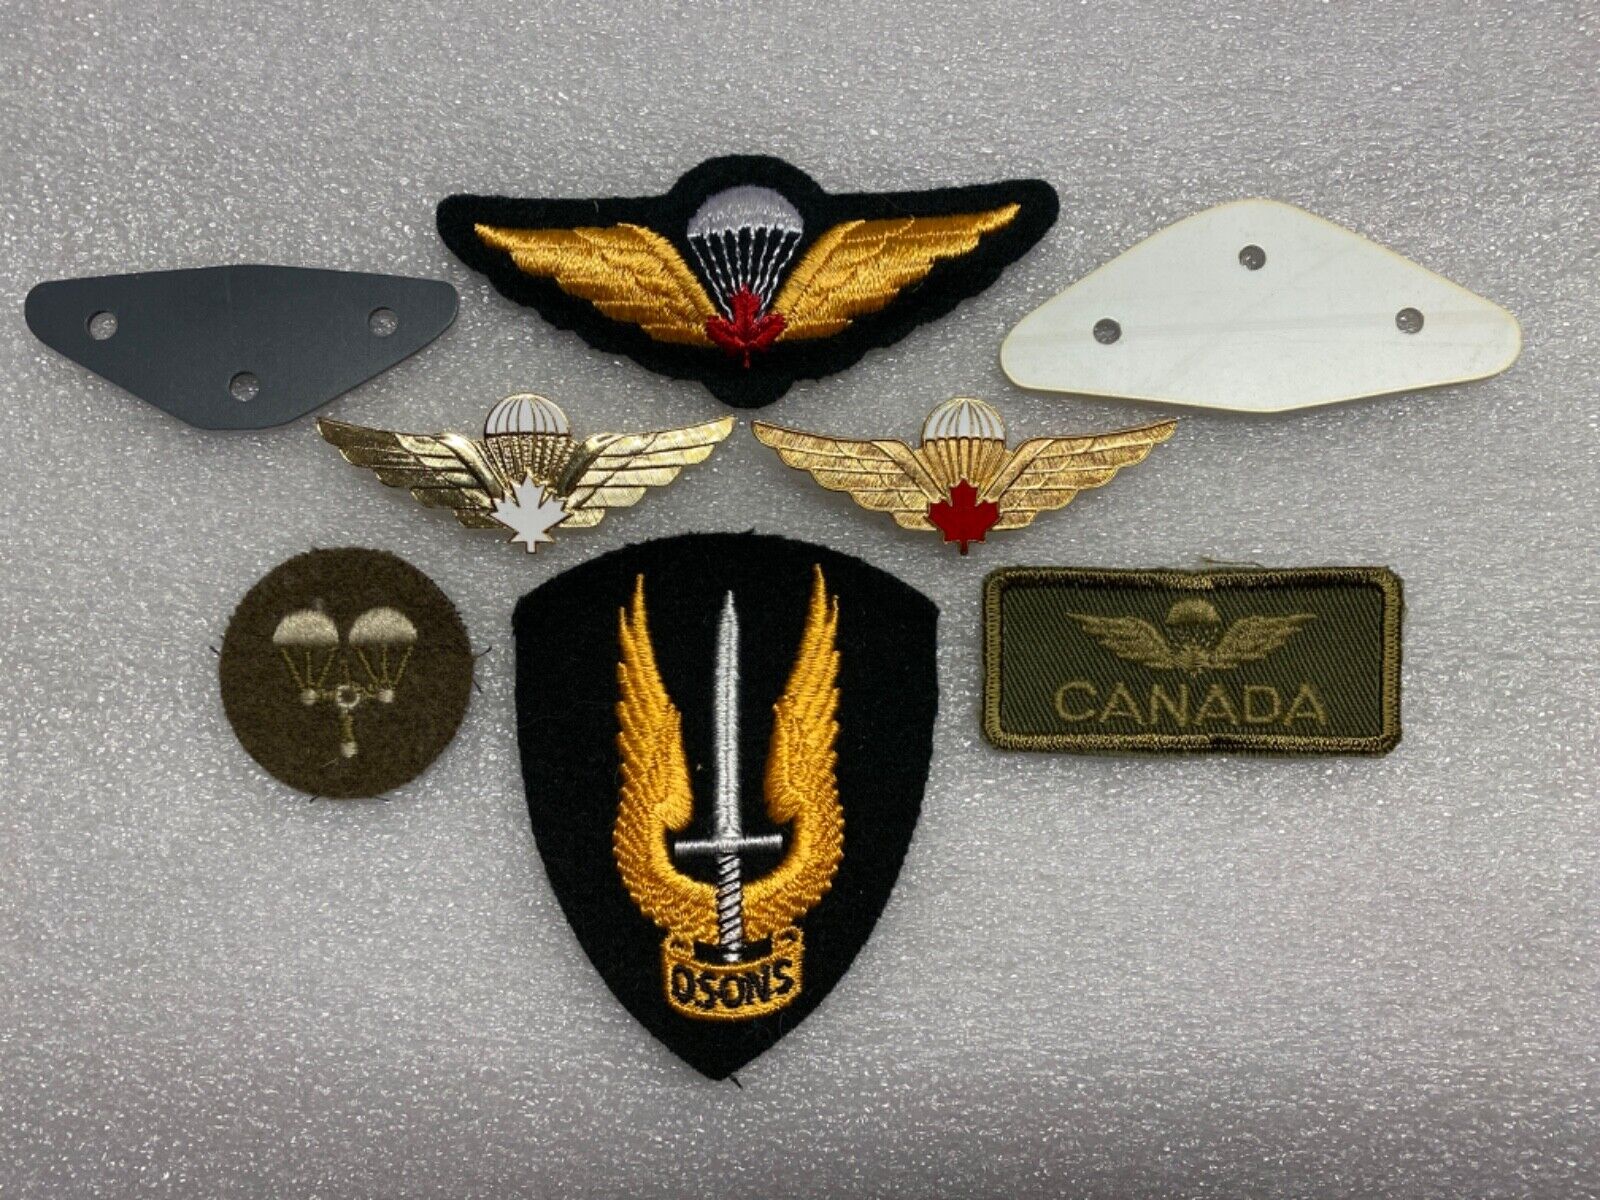 CANADA, CANDADIAN, PARA WINGS, SPECIAL SERVICE FORCE PATCH, AIRBORNE, GROUP OF 6